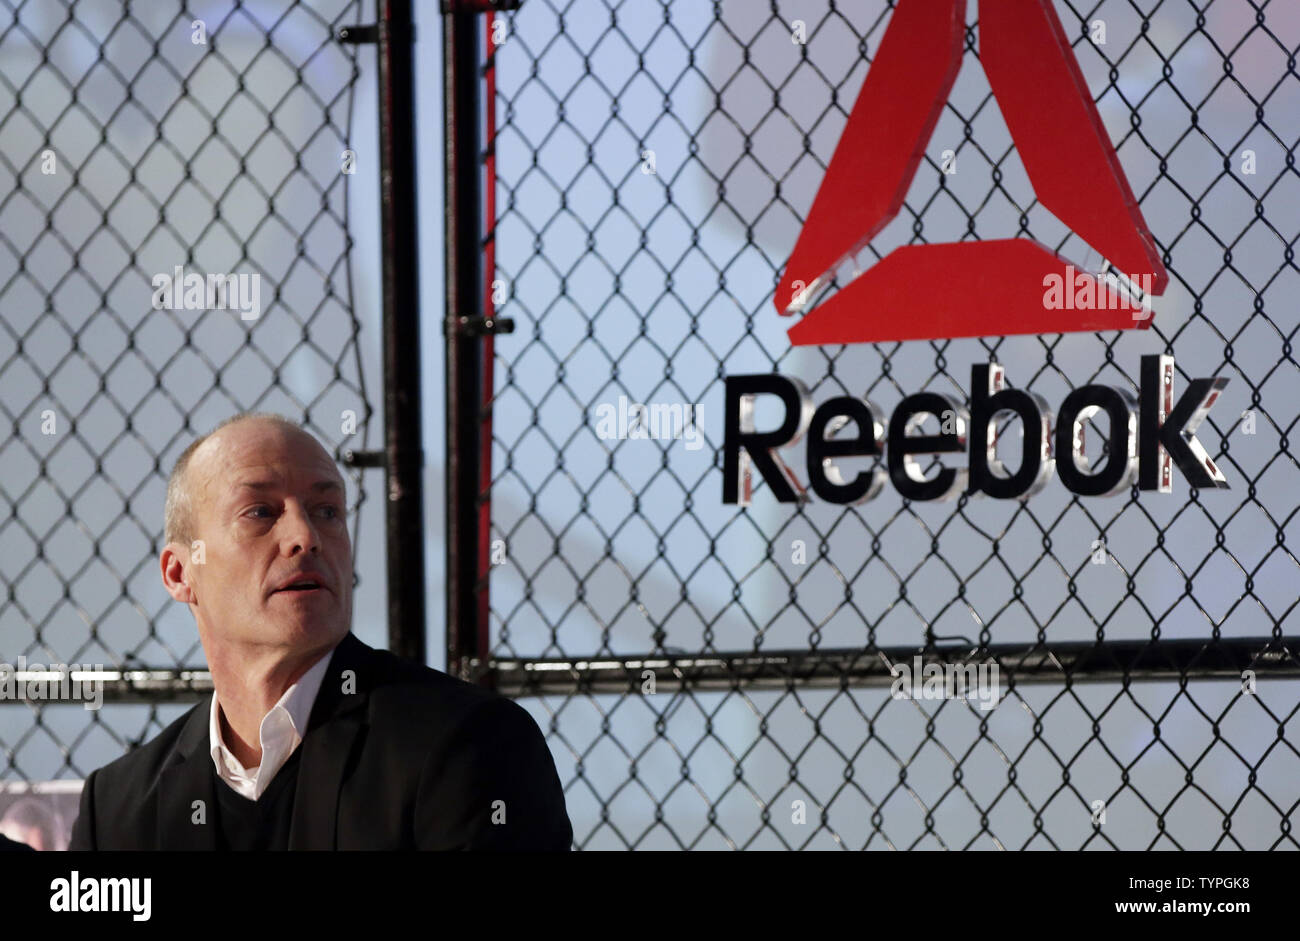 Who is the new president of Reebok?